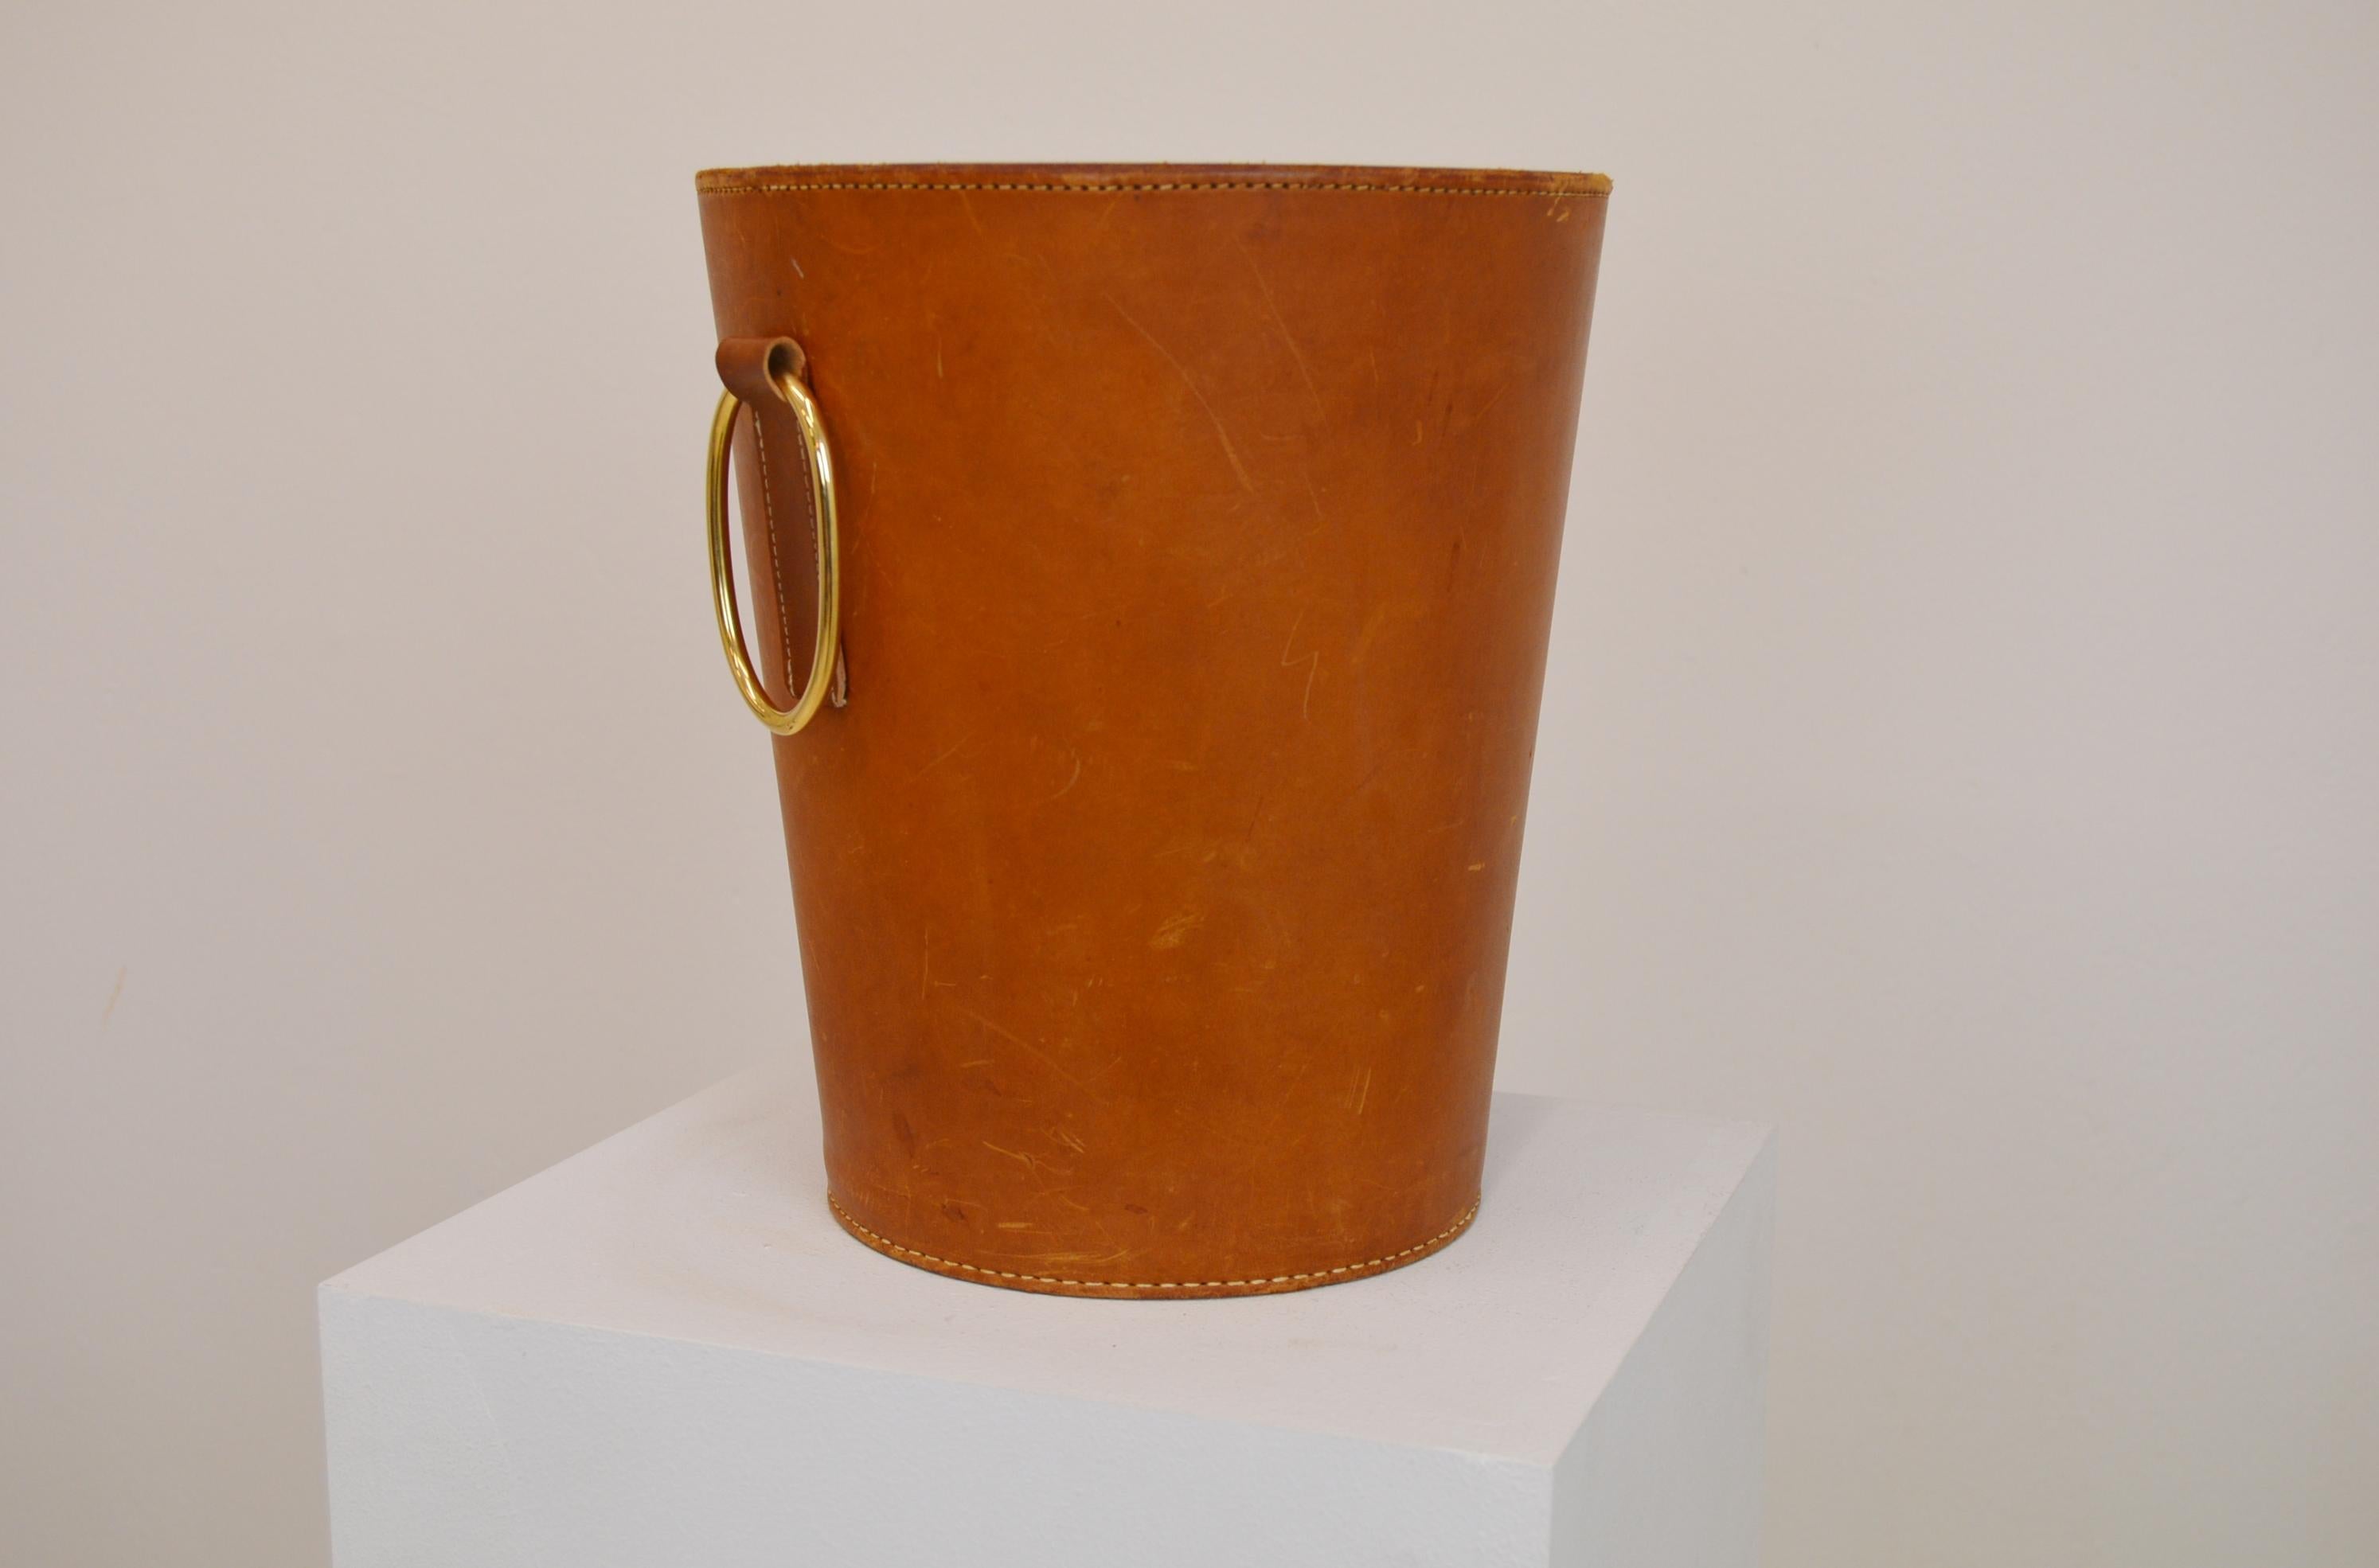 This waste paper basket is made of leather and brass.
It was designed by Carl Aubock Verkstedte for Illums Bolighus in the 1950s.